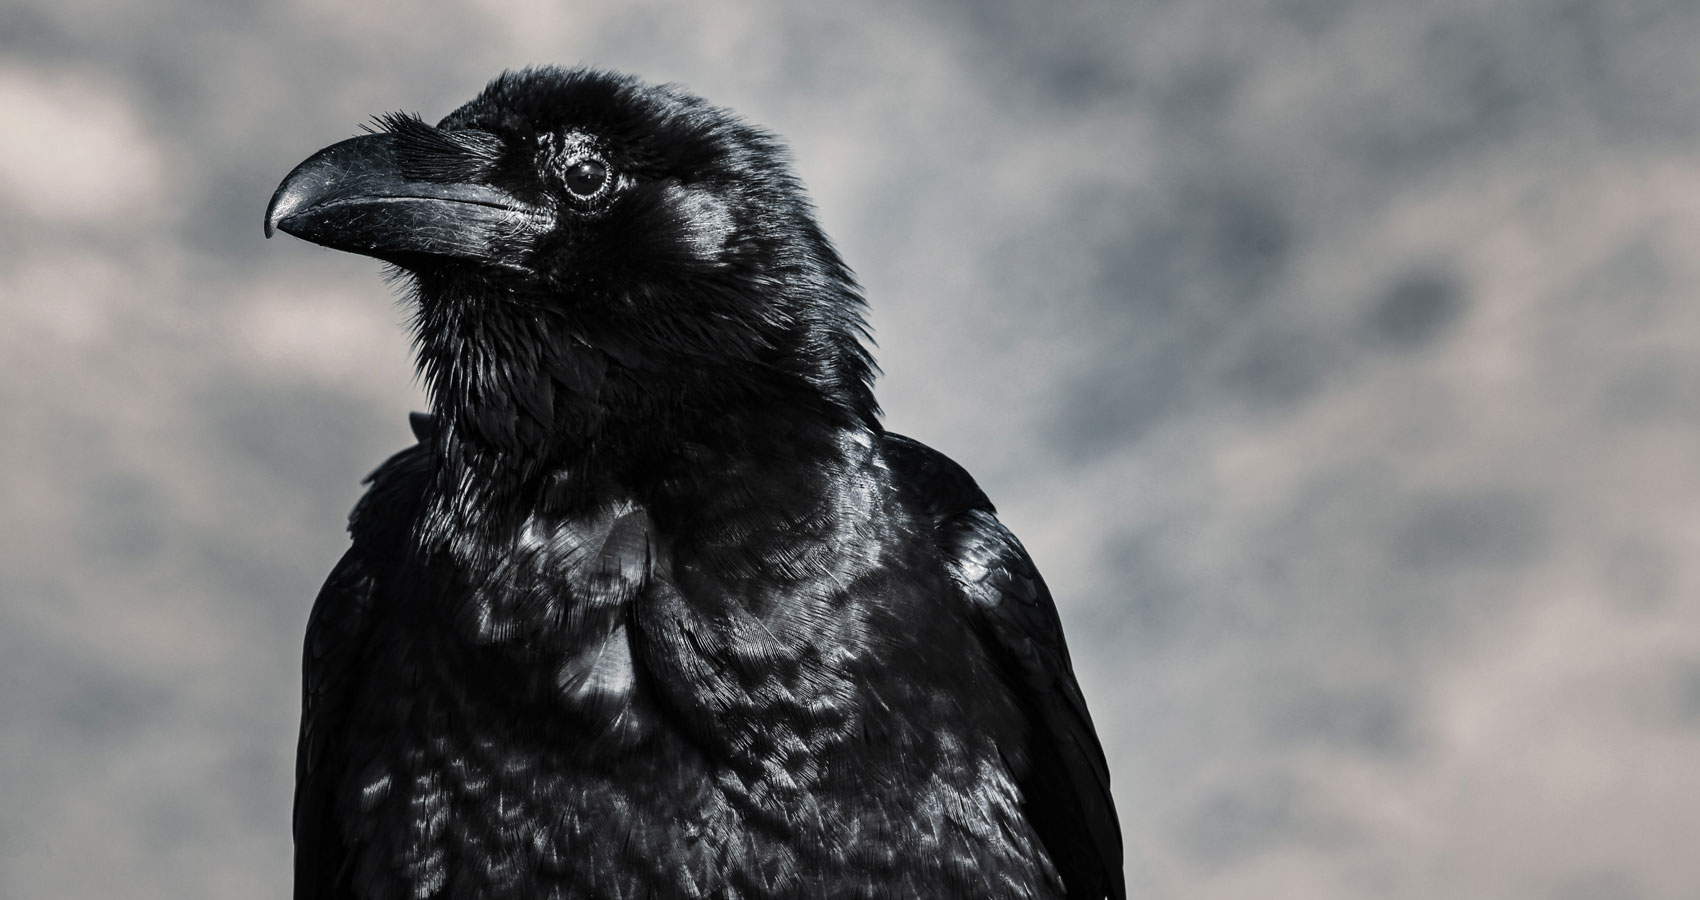 The Crow, poetry written by Raphfael Wormge at Spillwords.com